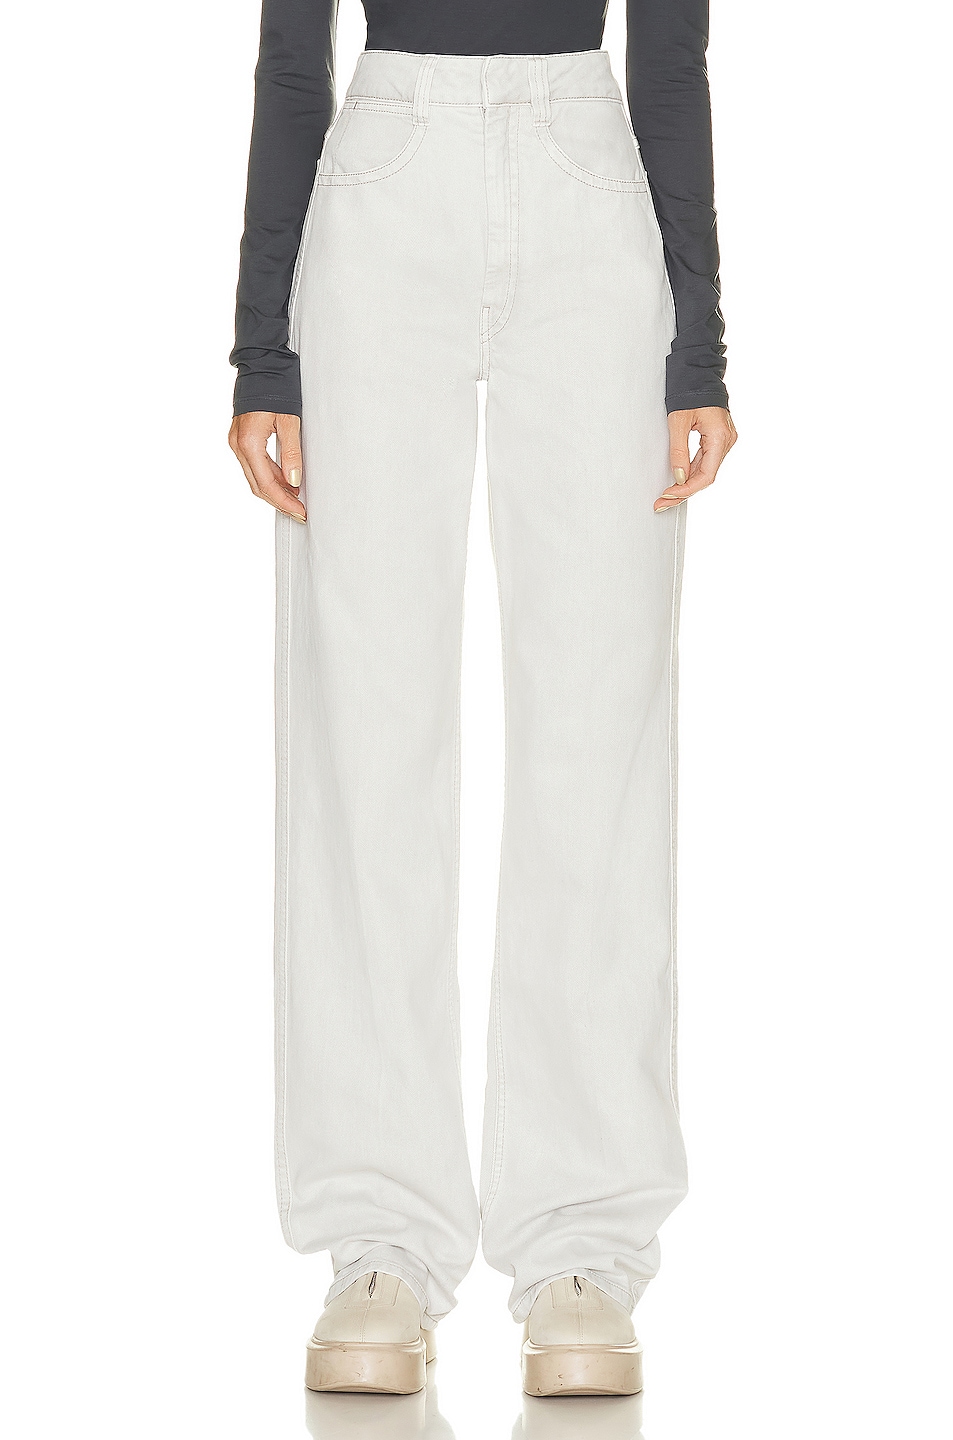 Image 1 of Lemaire High Waisted Jean in Denim Snow Grey